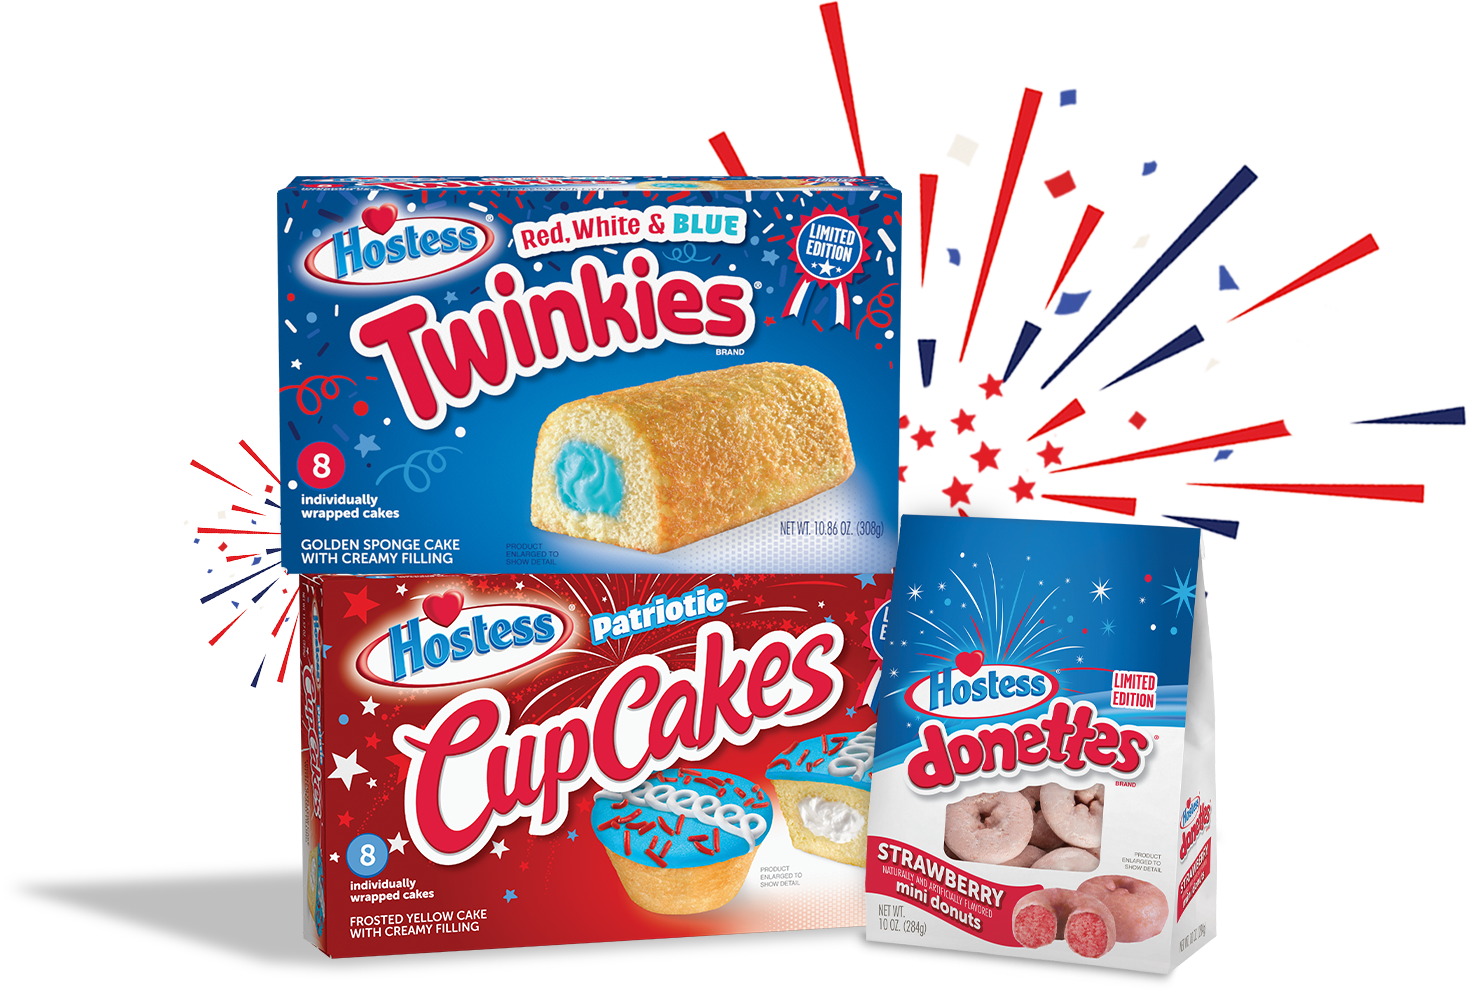 Patriot CupCakes, Red White and Blue Twinkies, and Strawberry Donettes.